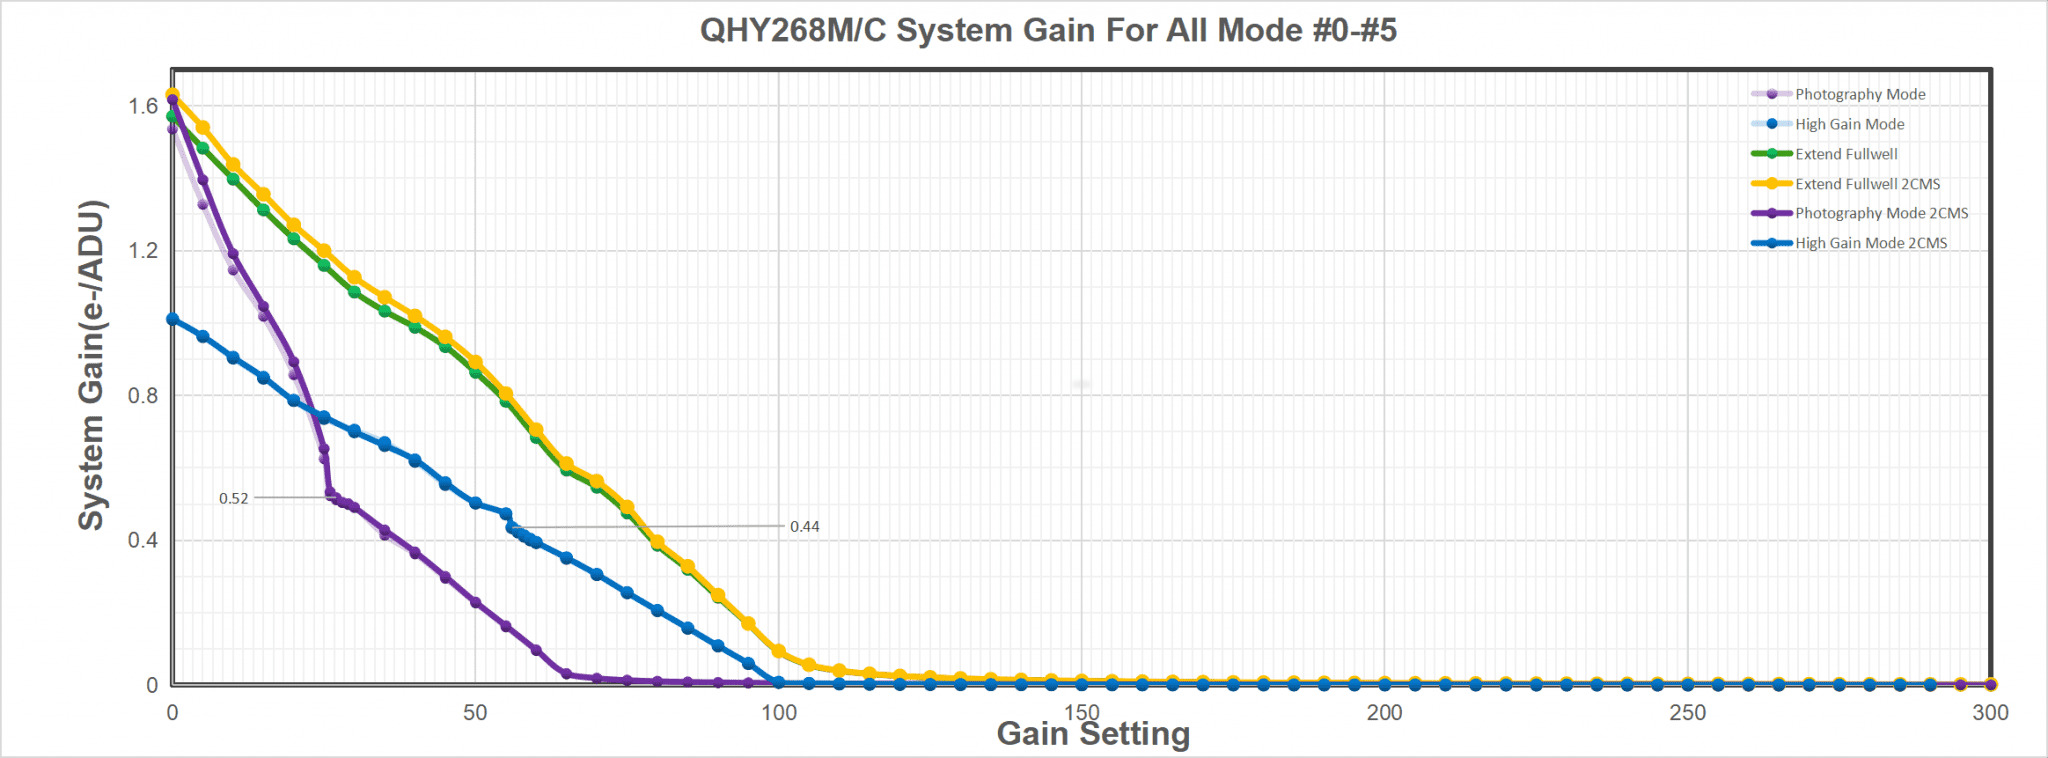 QHY268M/C System Gain For All Mode